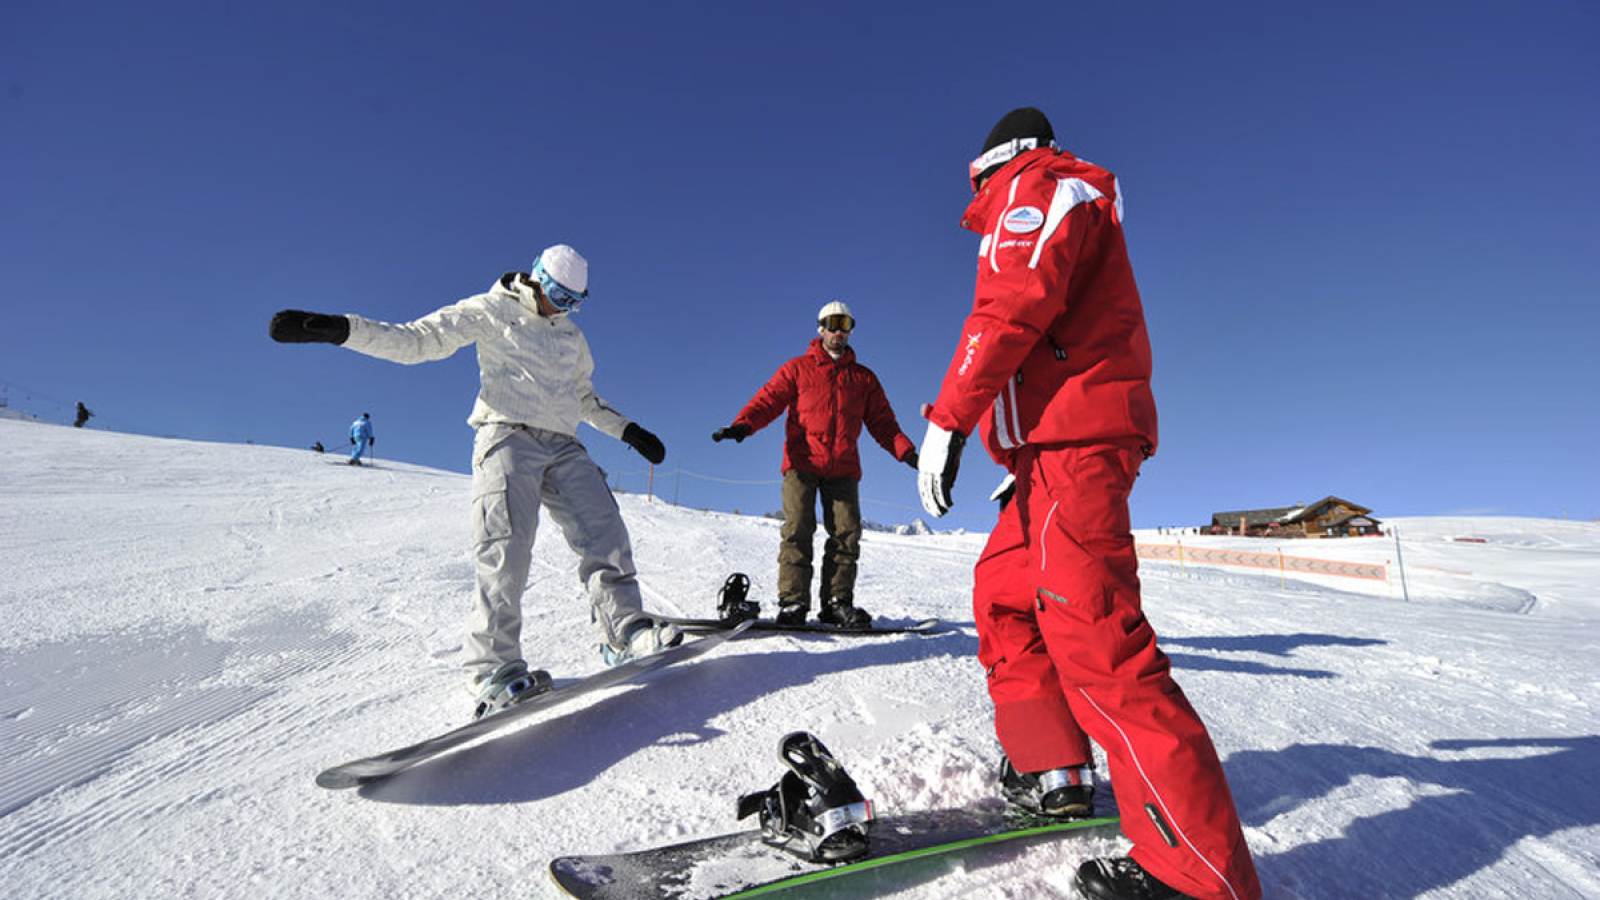 Snowboard training course